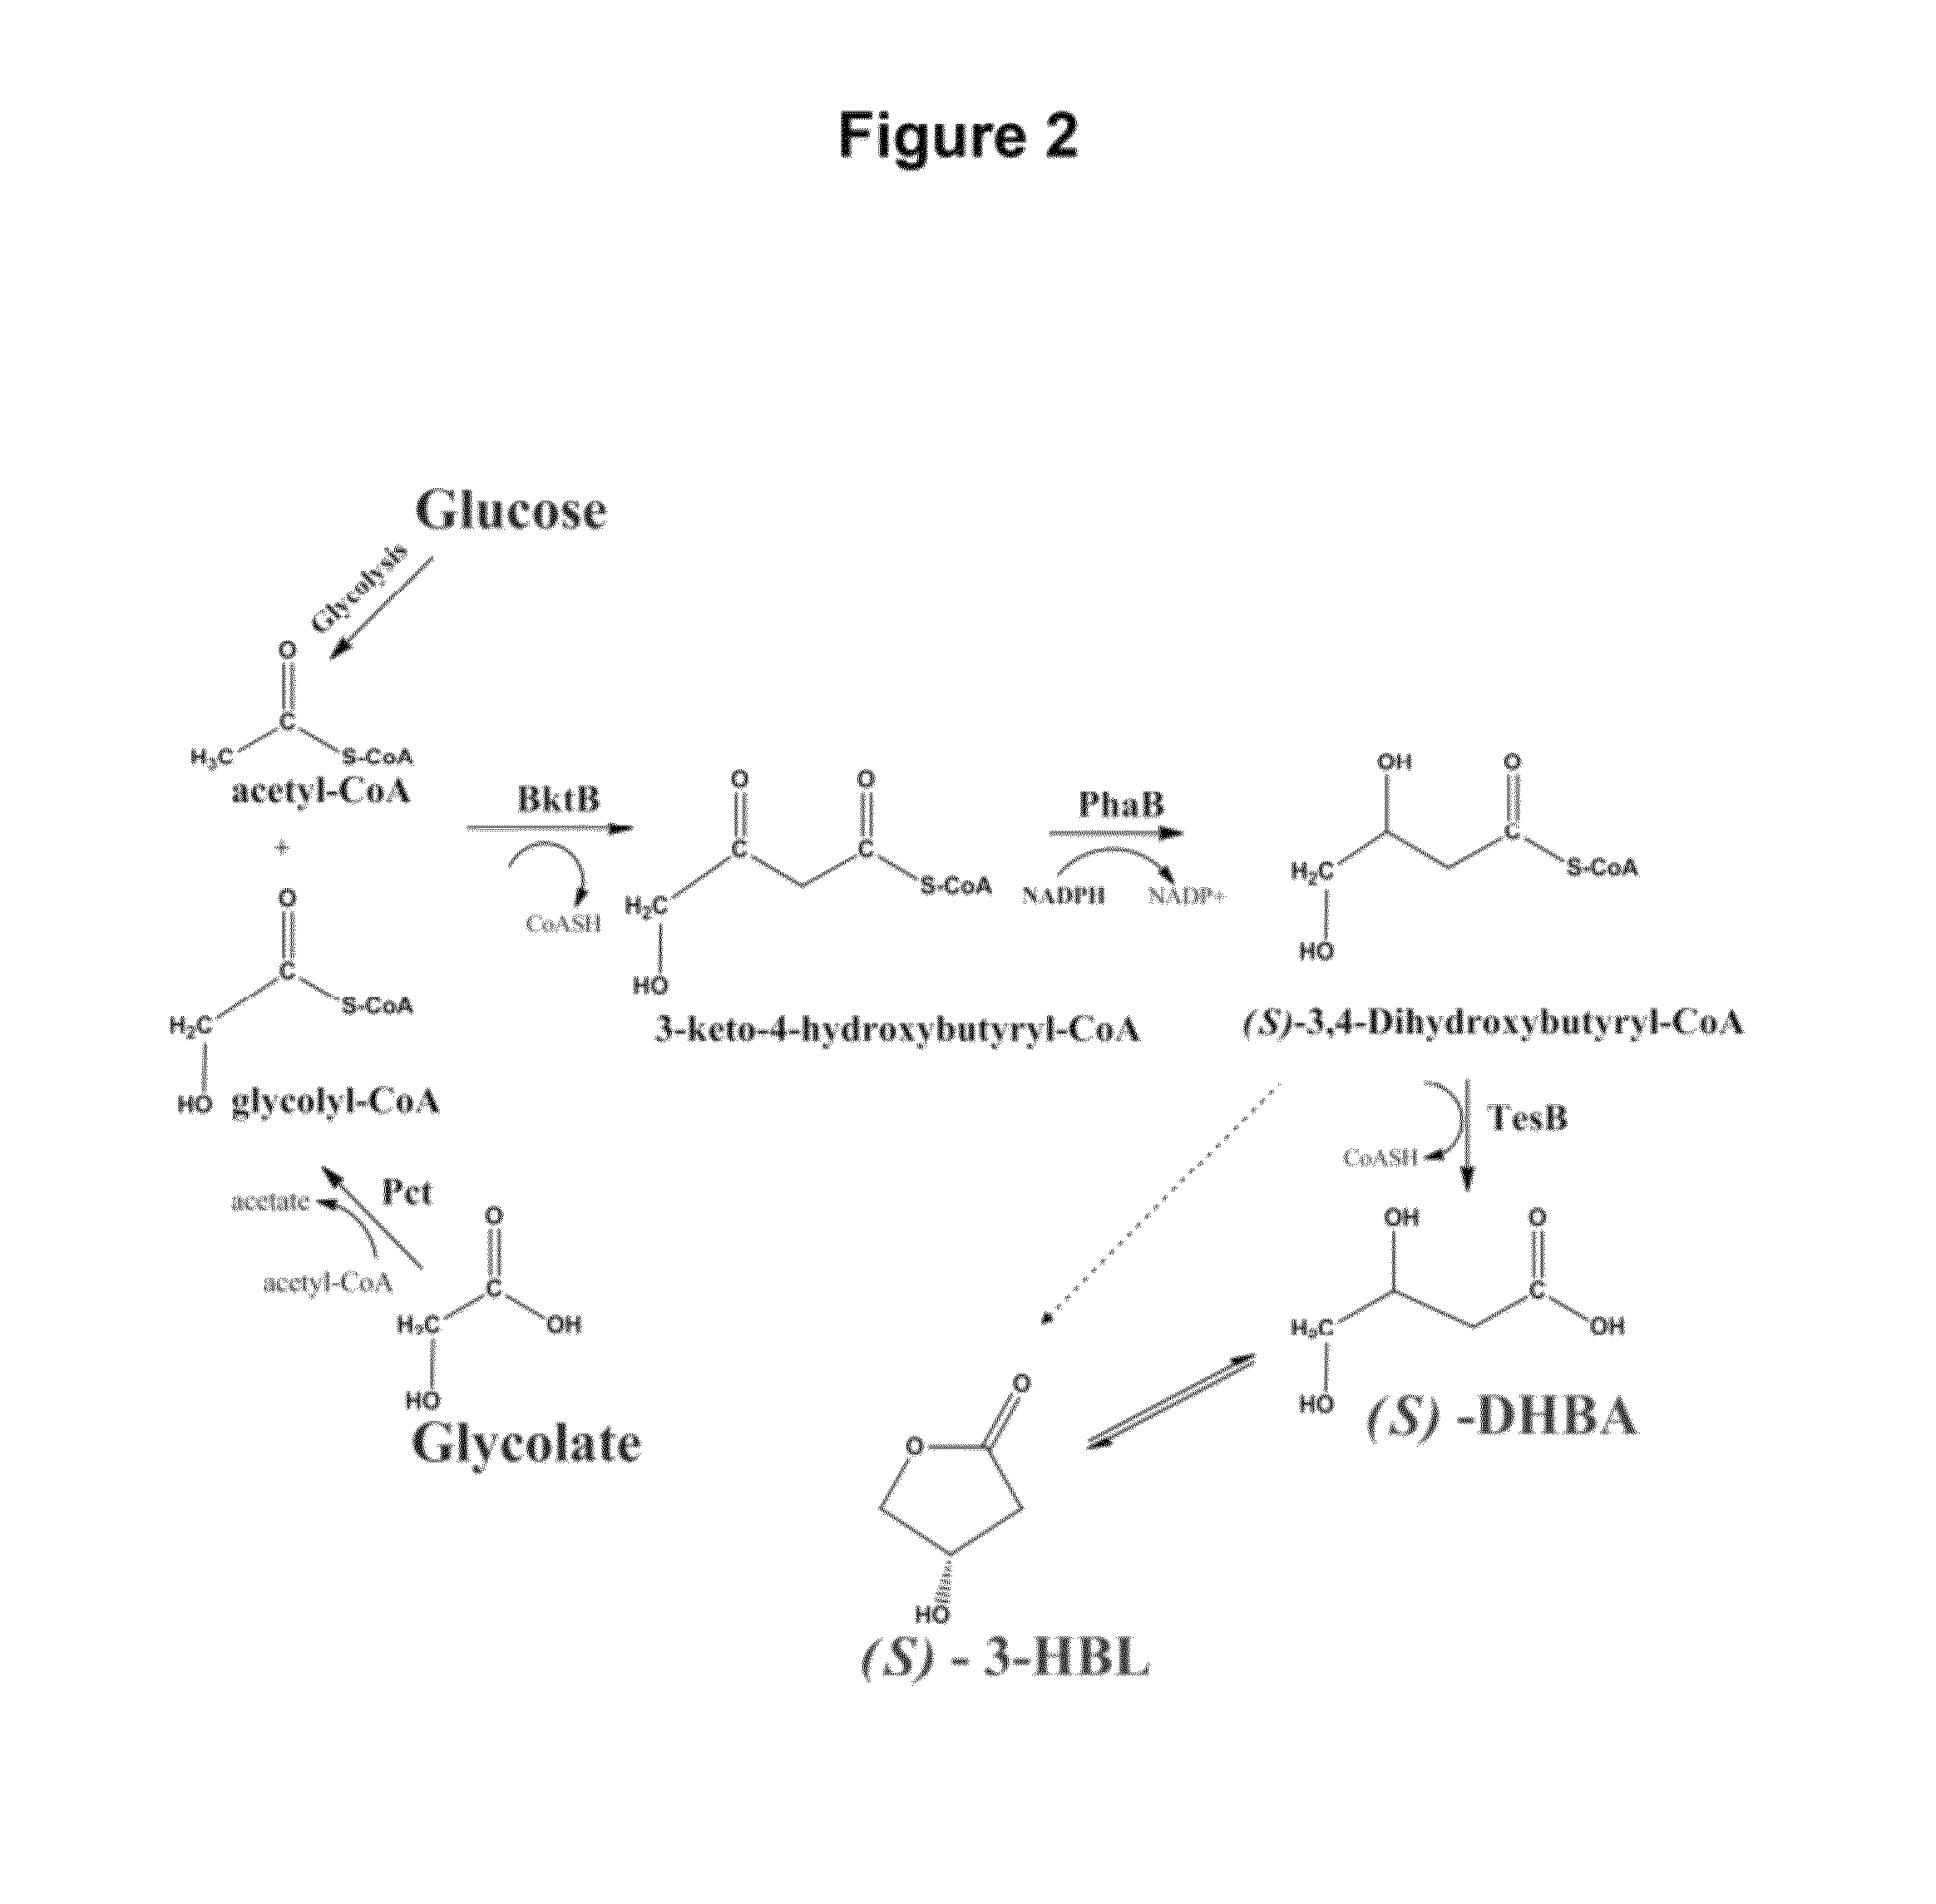 Microbial production of 3,4-dihydroxybutyrate (3,4-DHBA), 2,3-dihydroxybutyrate (2,3-DHBA) and 3-hydroxybutyrolactone (3-HBL)